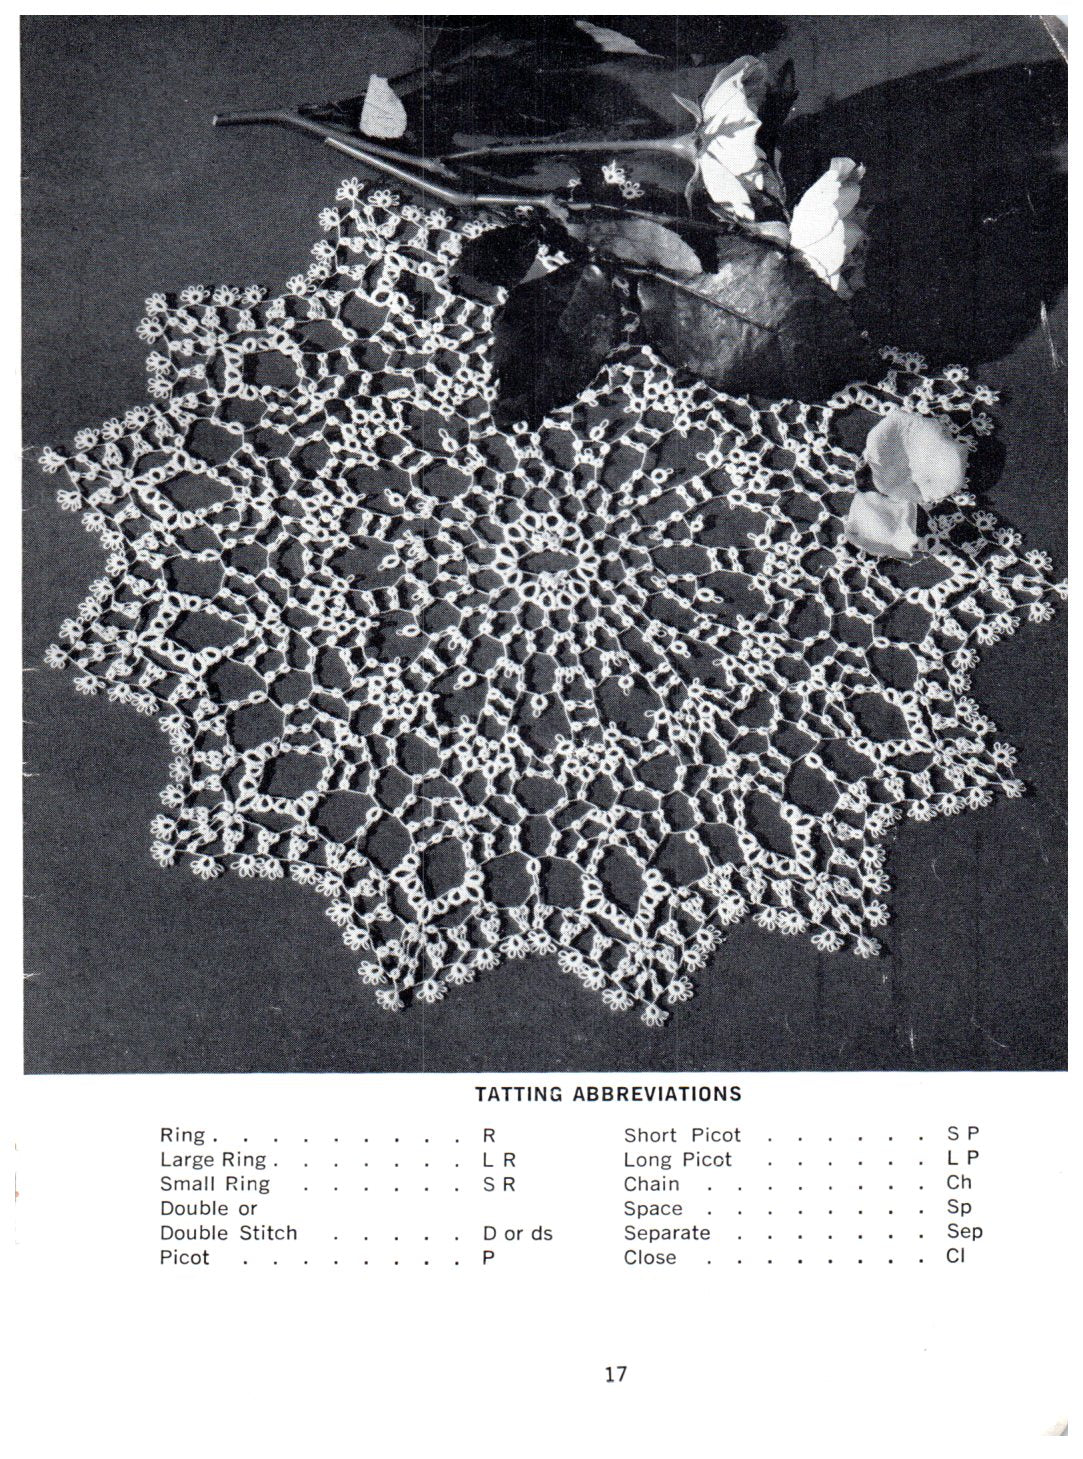 Vintage Doily Pattern Book Pineapple Crochet Knit Tatted American Thread Co. Star Book No 172 Downloadable PDF - At Grandma's Table